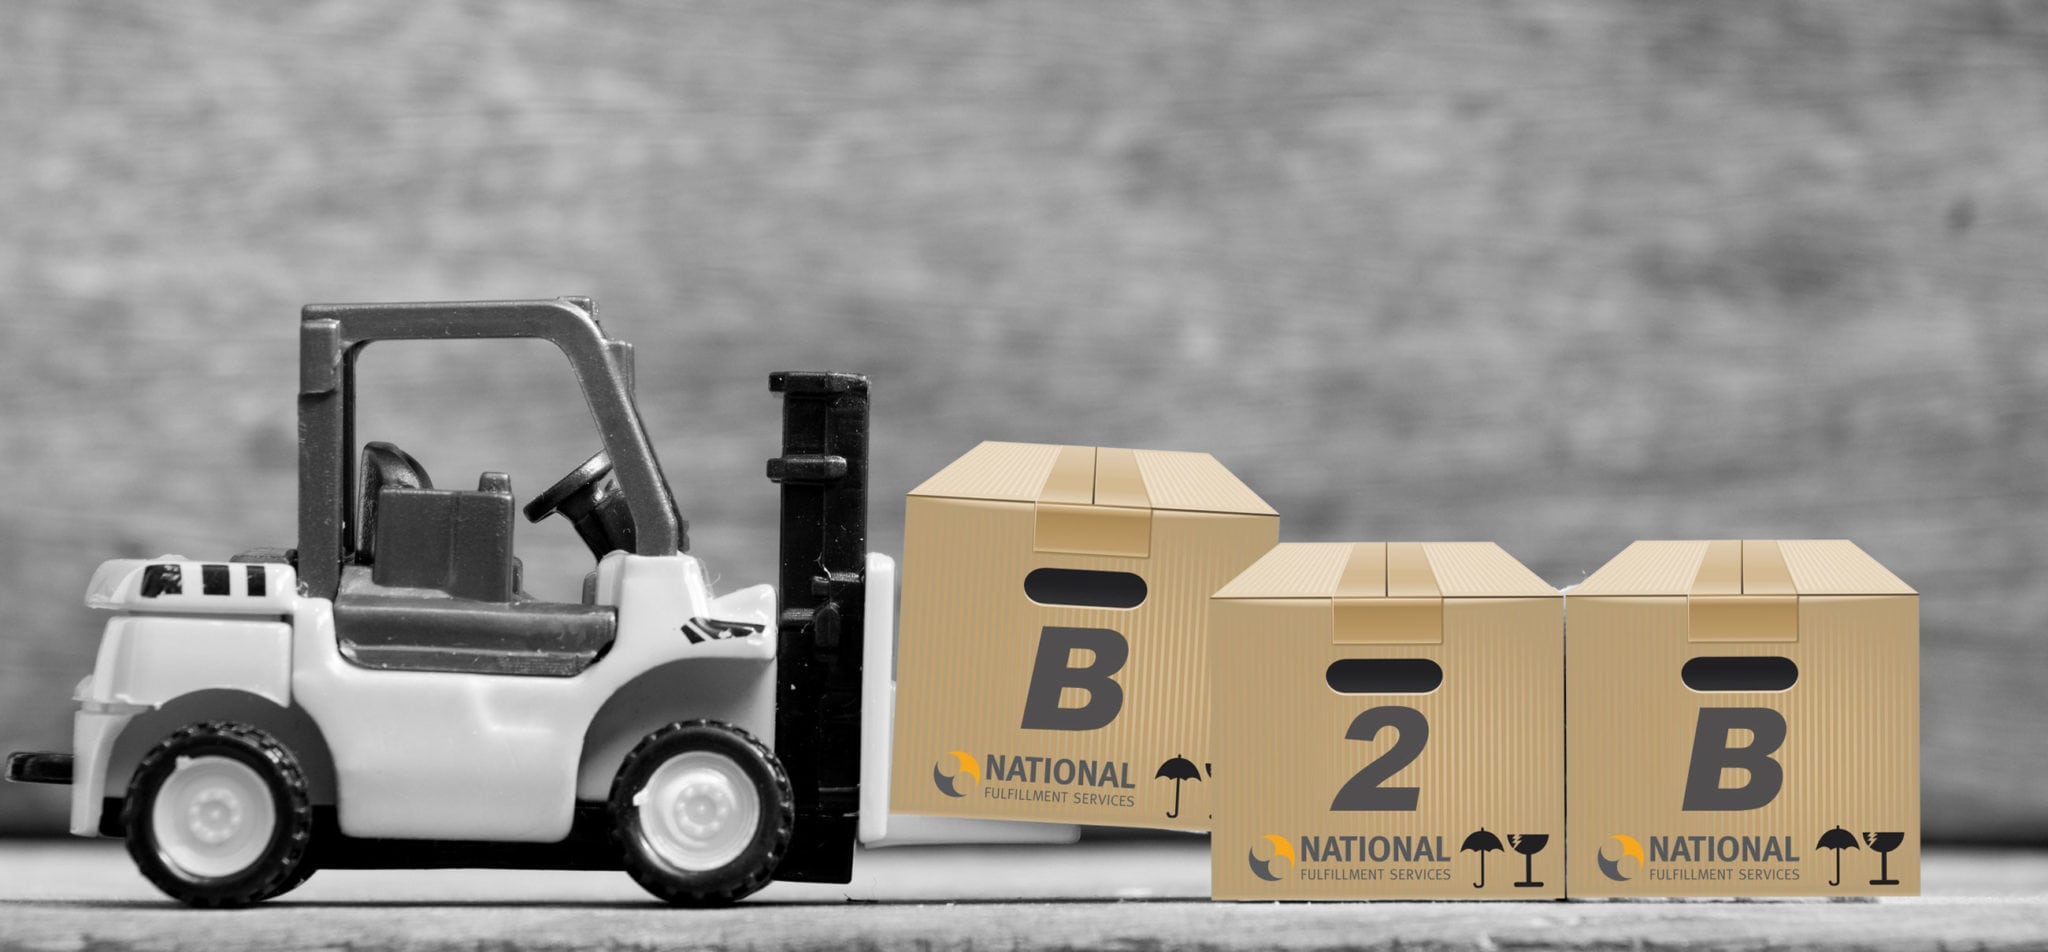 Business to Business Fulfillment Services - National Fulfillment